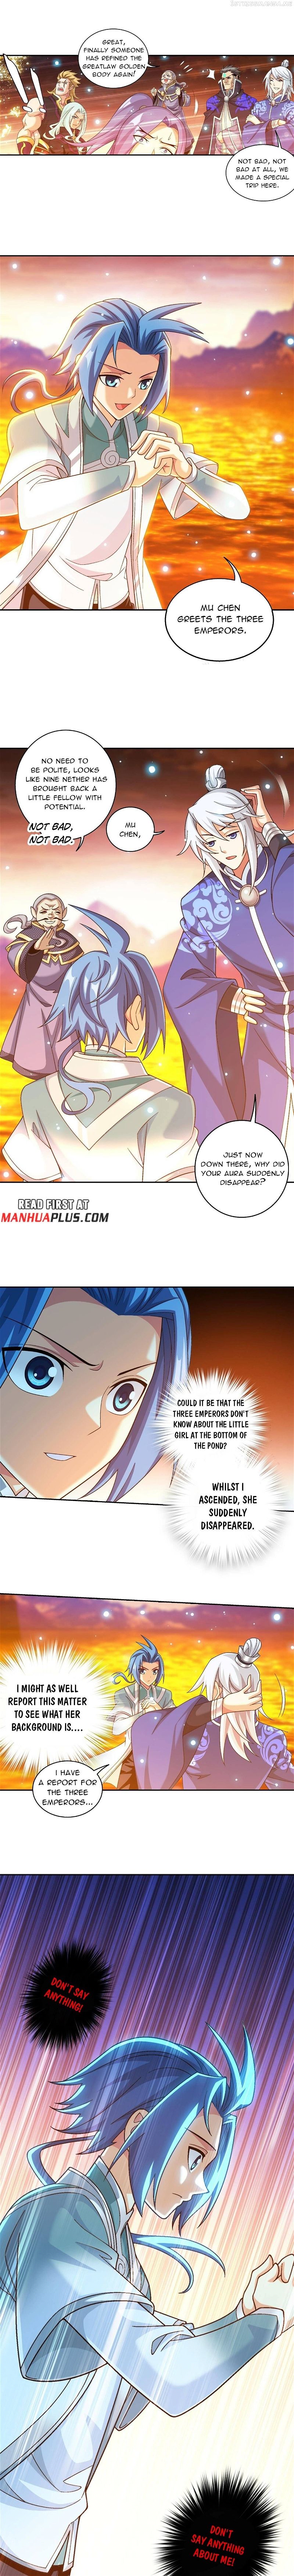 The Great Ruler Chapter 393 page 3